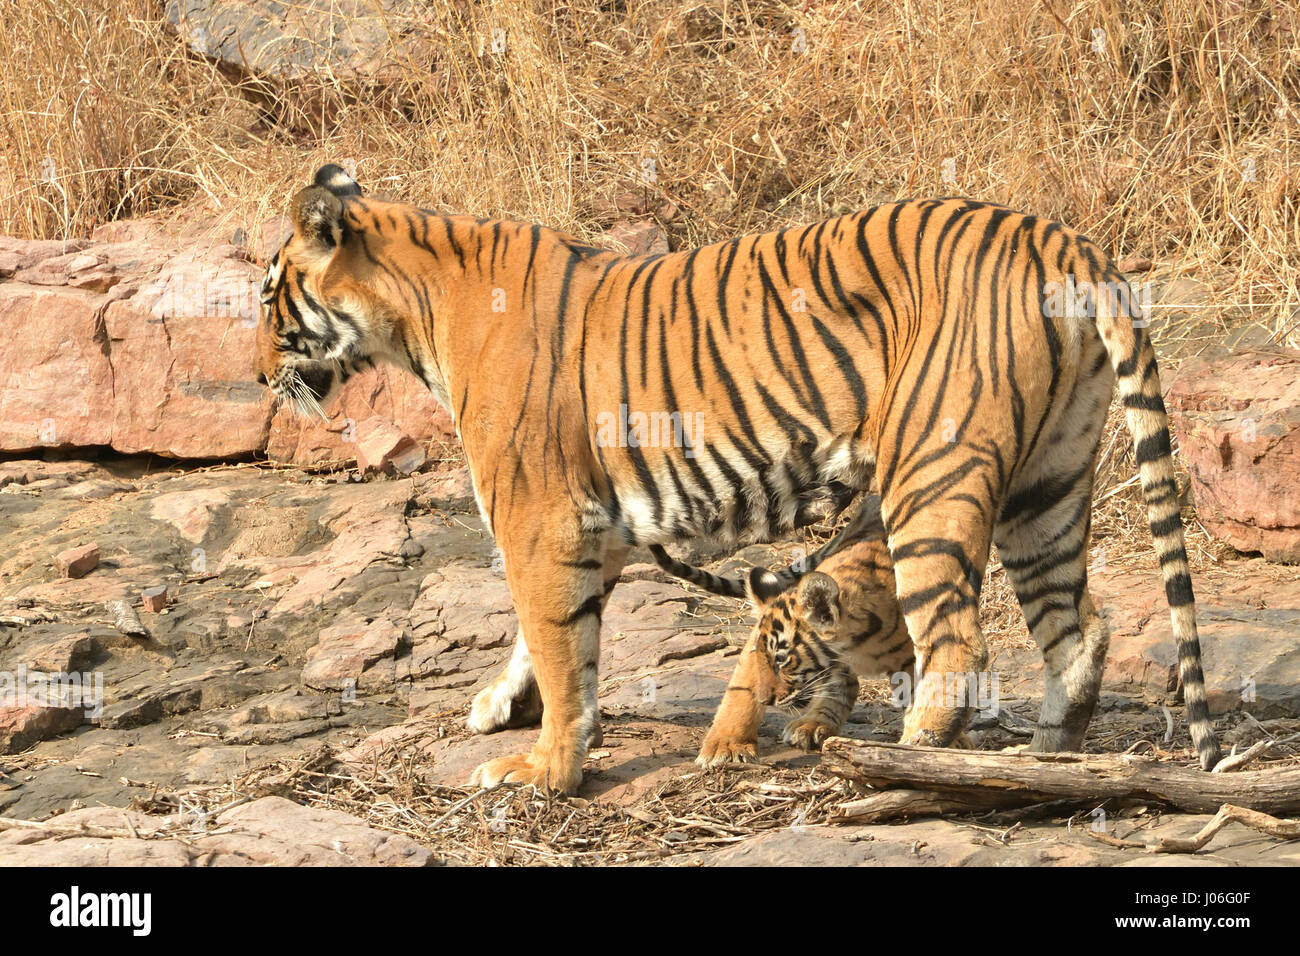 Bengal tiger, mother and cub, playing on a rocky outcrop in Ranthambhore tiger reserve, India Stock Photo